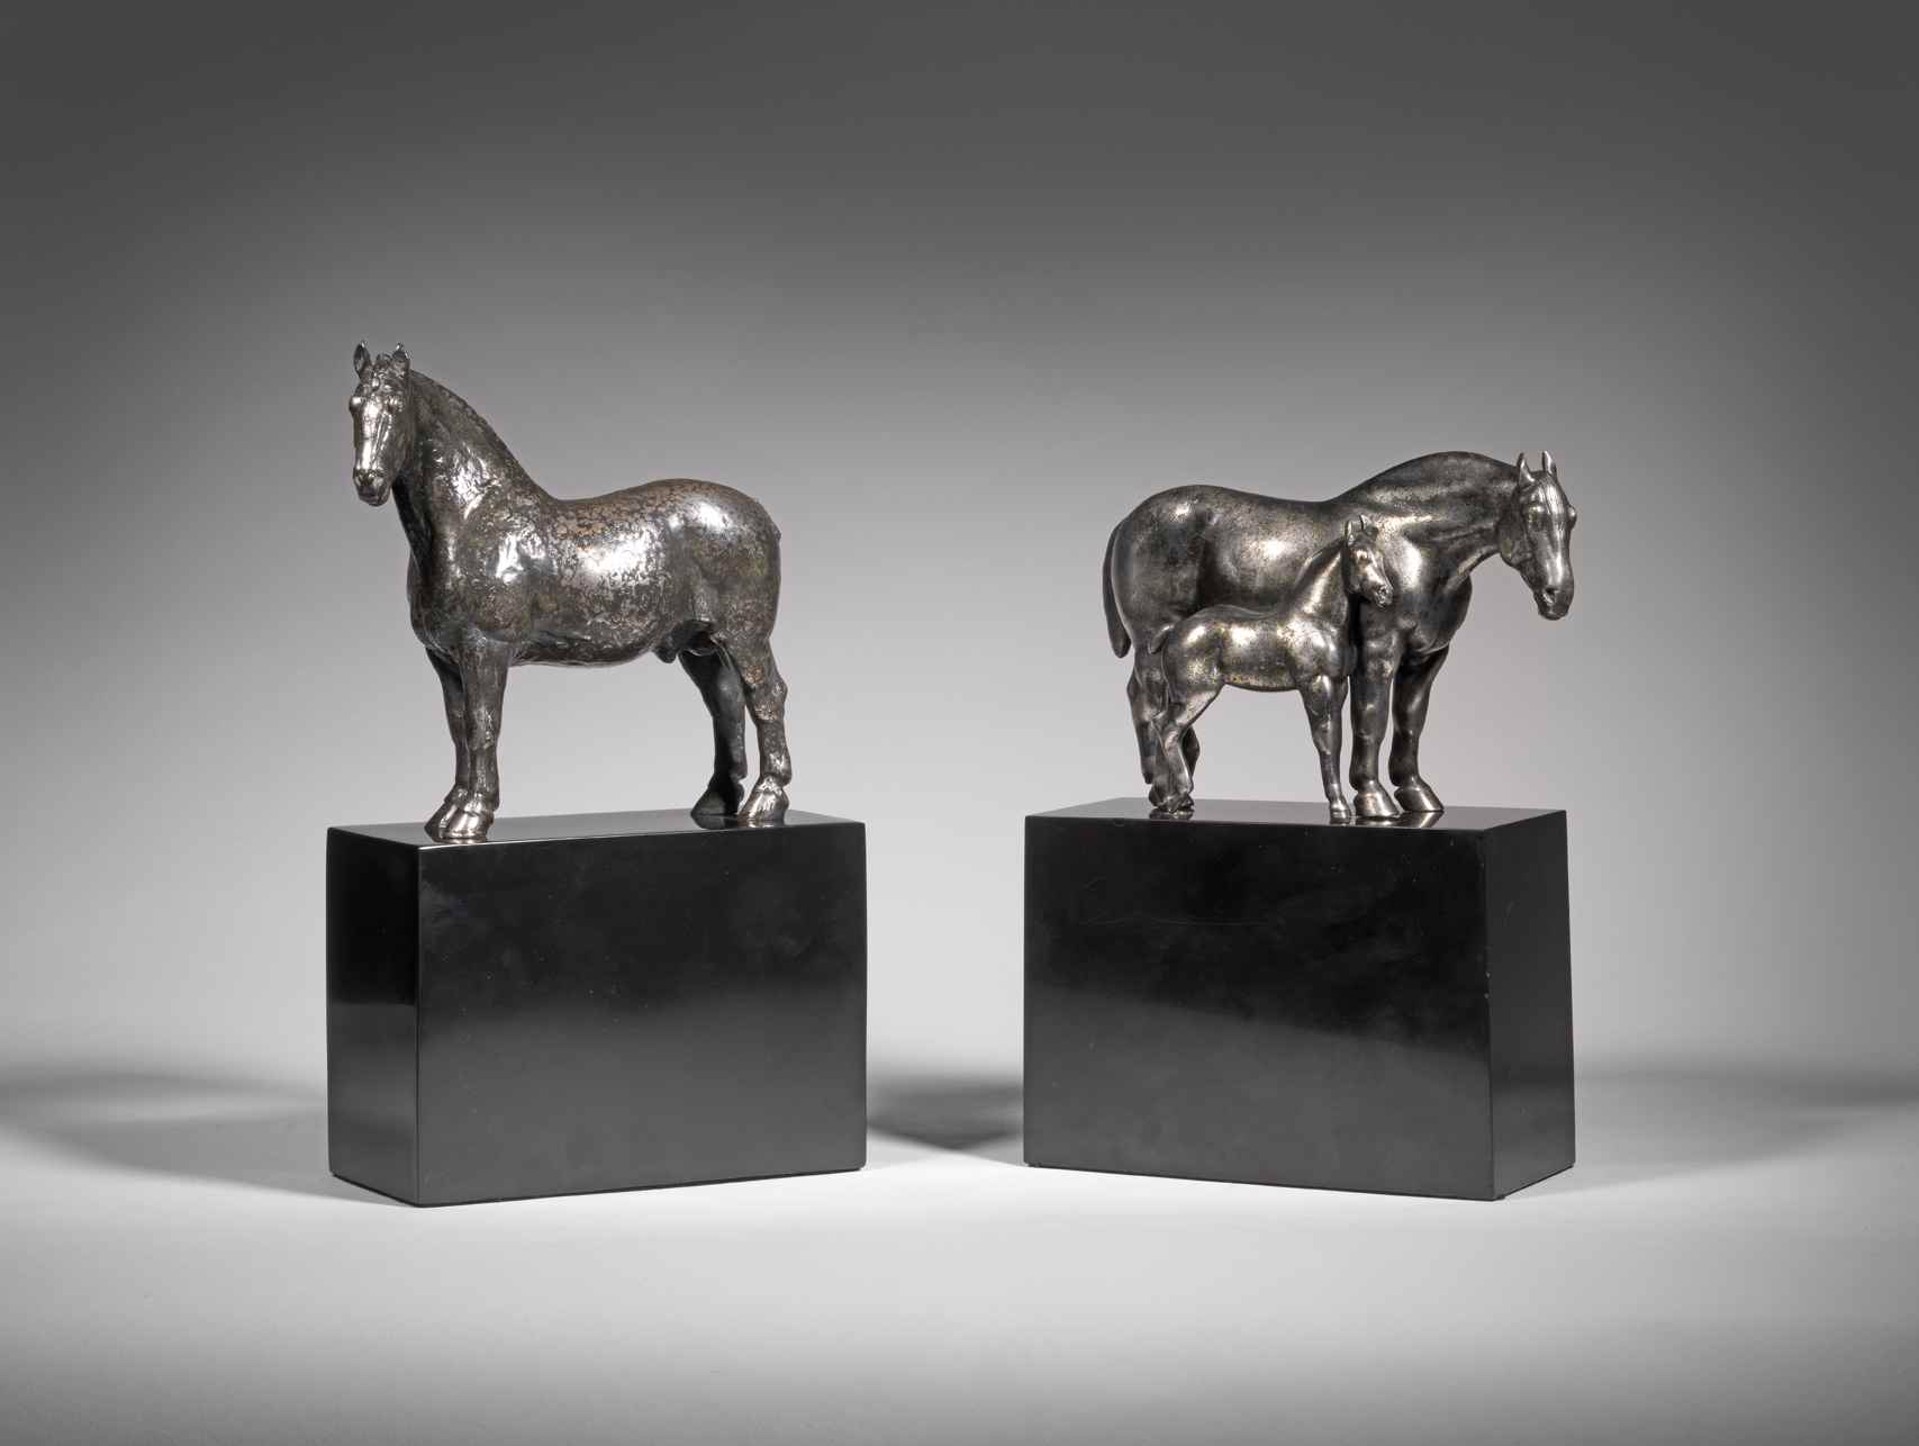 Percheron Stallion, Rhum, and Mare and Foal, Messaline, 1930, a pair by Herbert Haseltine